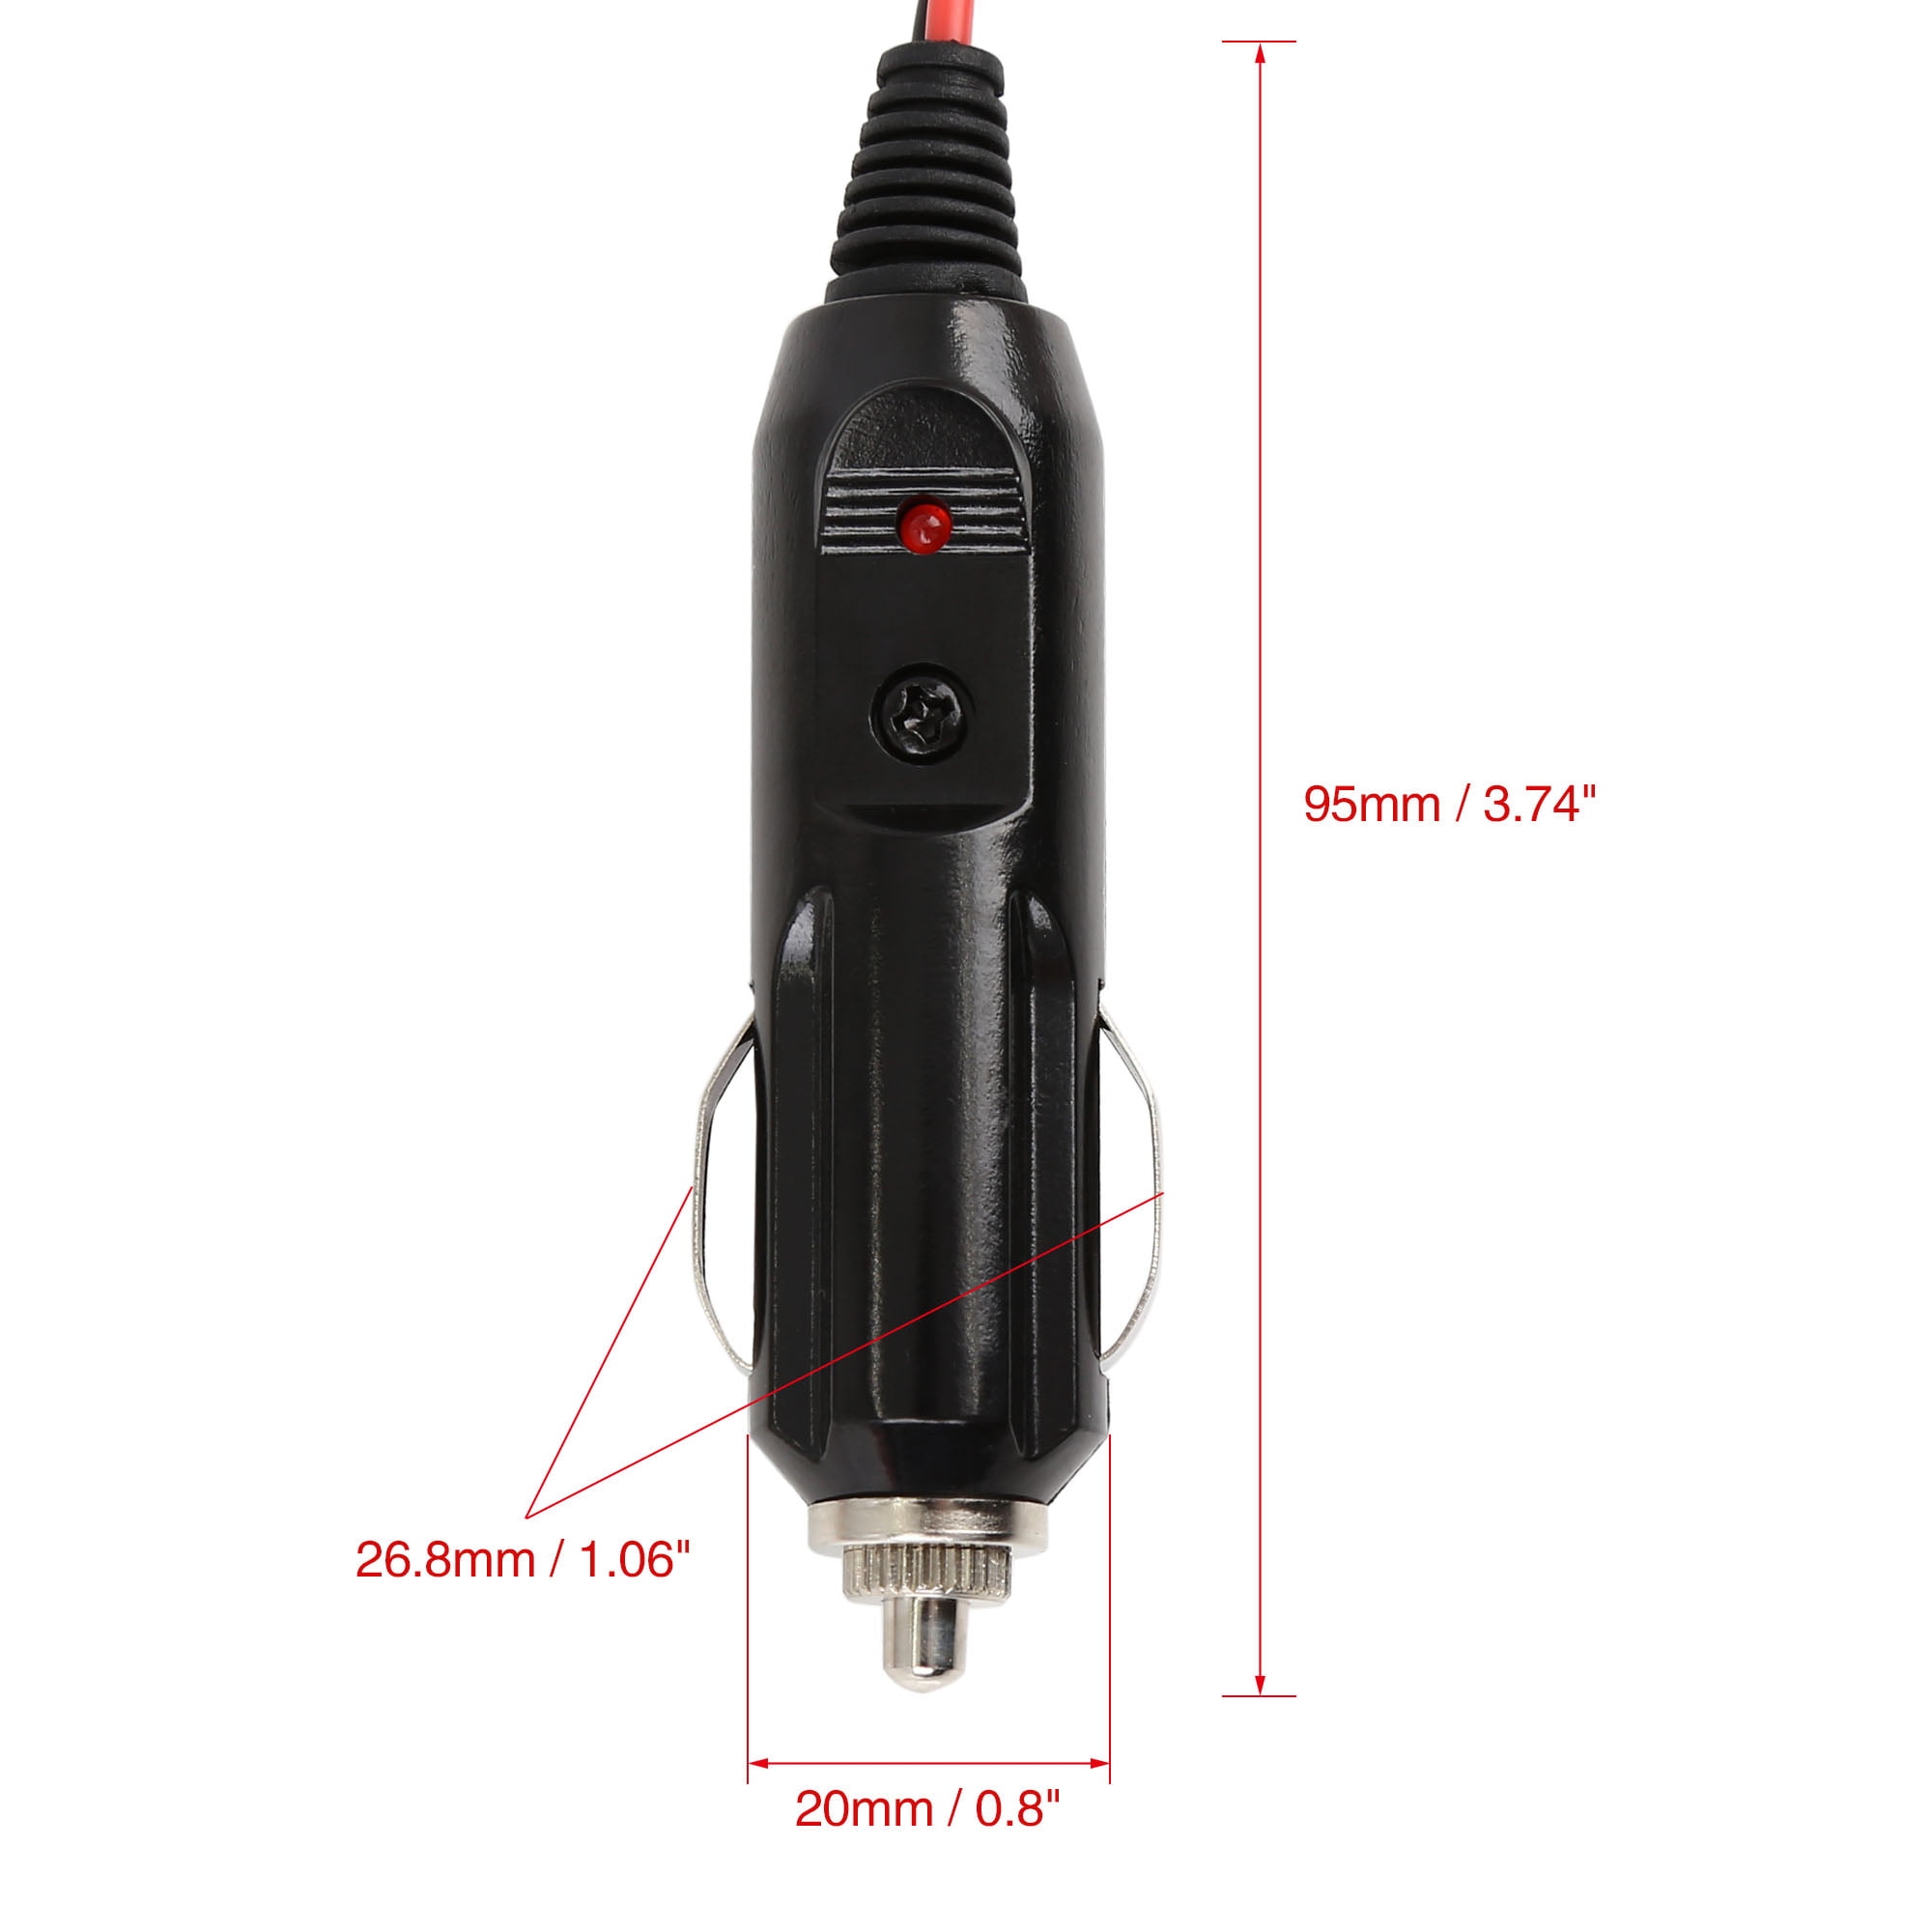 Cigarette Lighter Male Plug Adapter Inverter Cable Power Supply Cord  12V/24V 3FT 16AWG with LED Light for Car Inverter,Air Pump, Electric Cup DIY